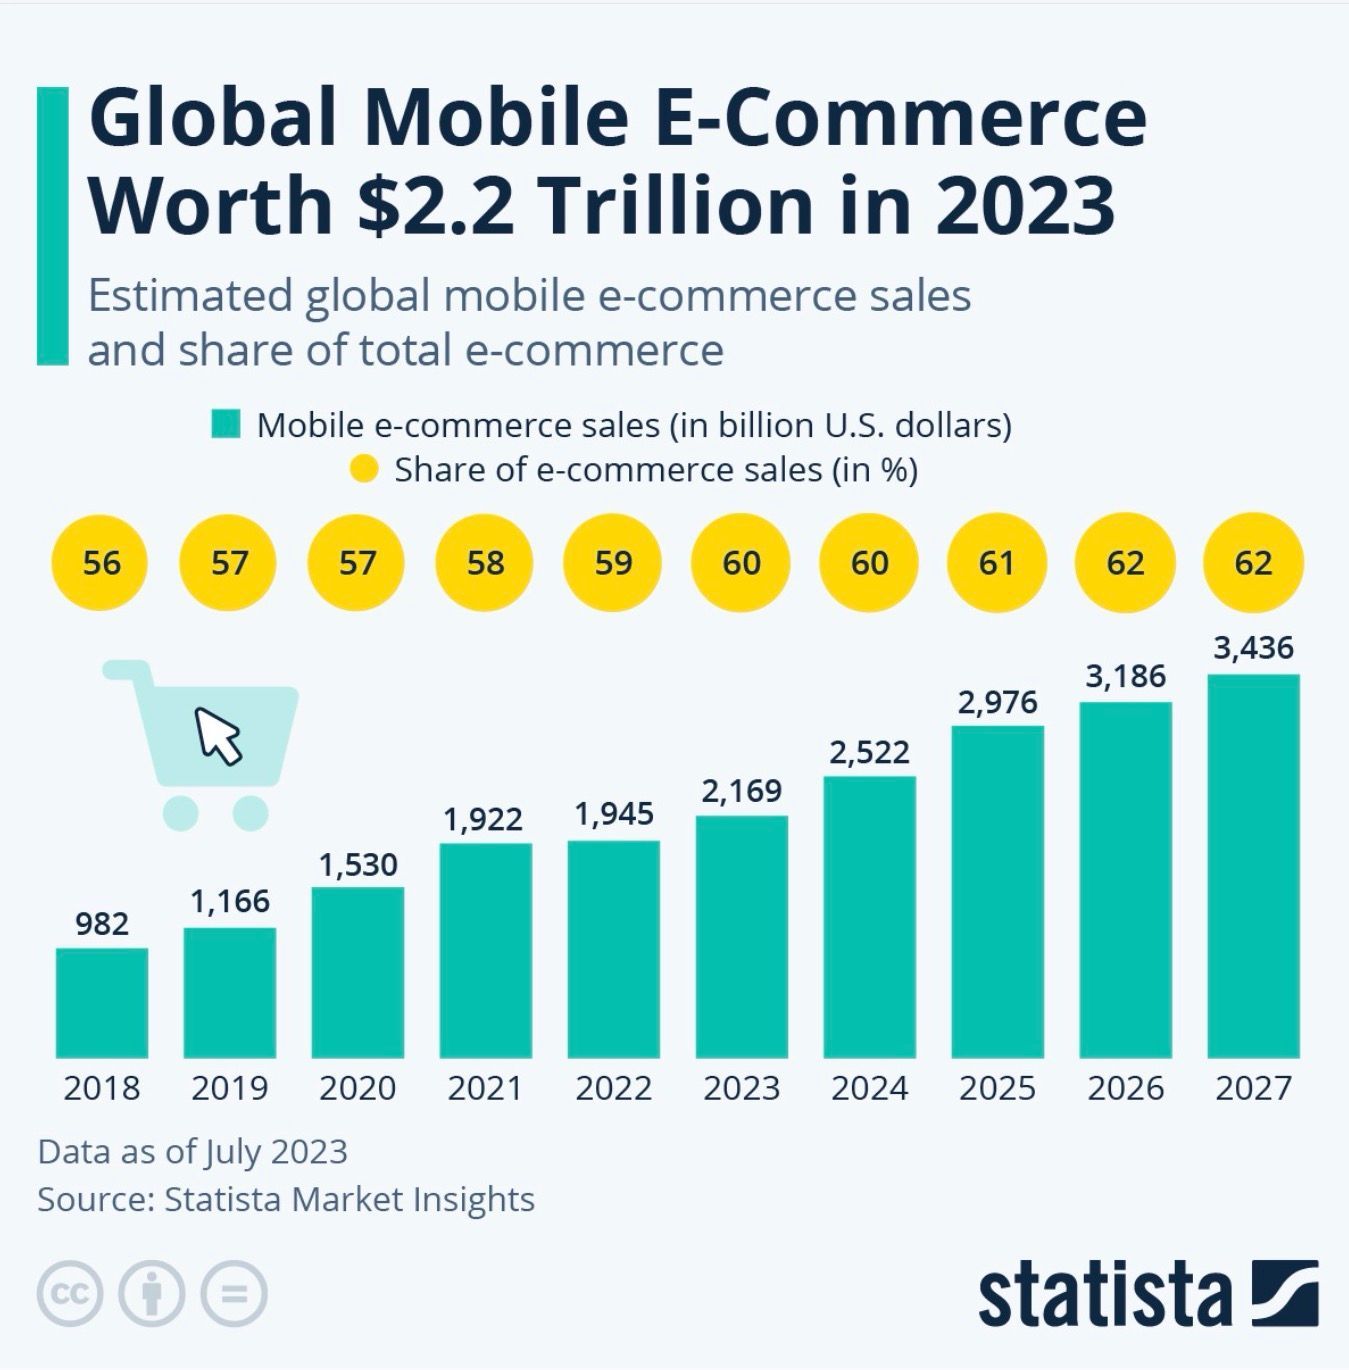 A graph showing global mobile e-commerce worth in 2023